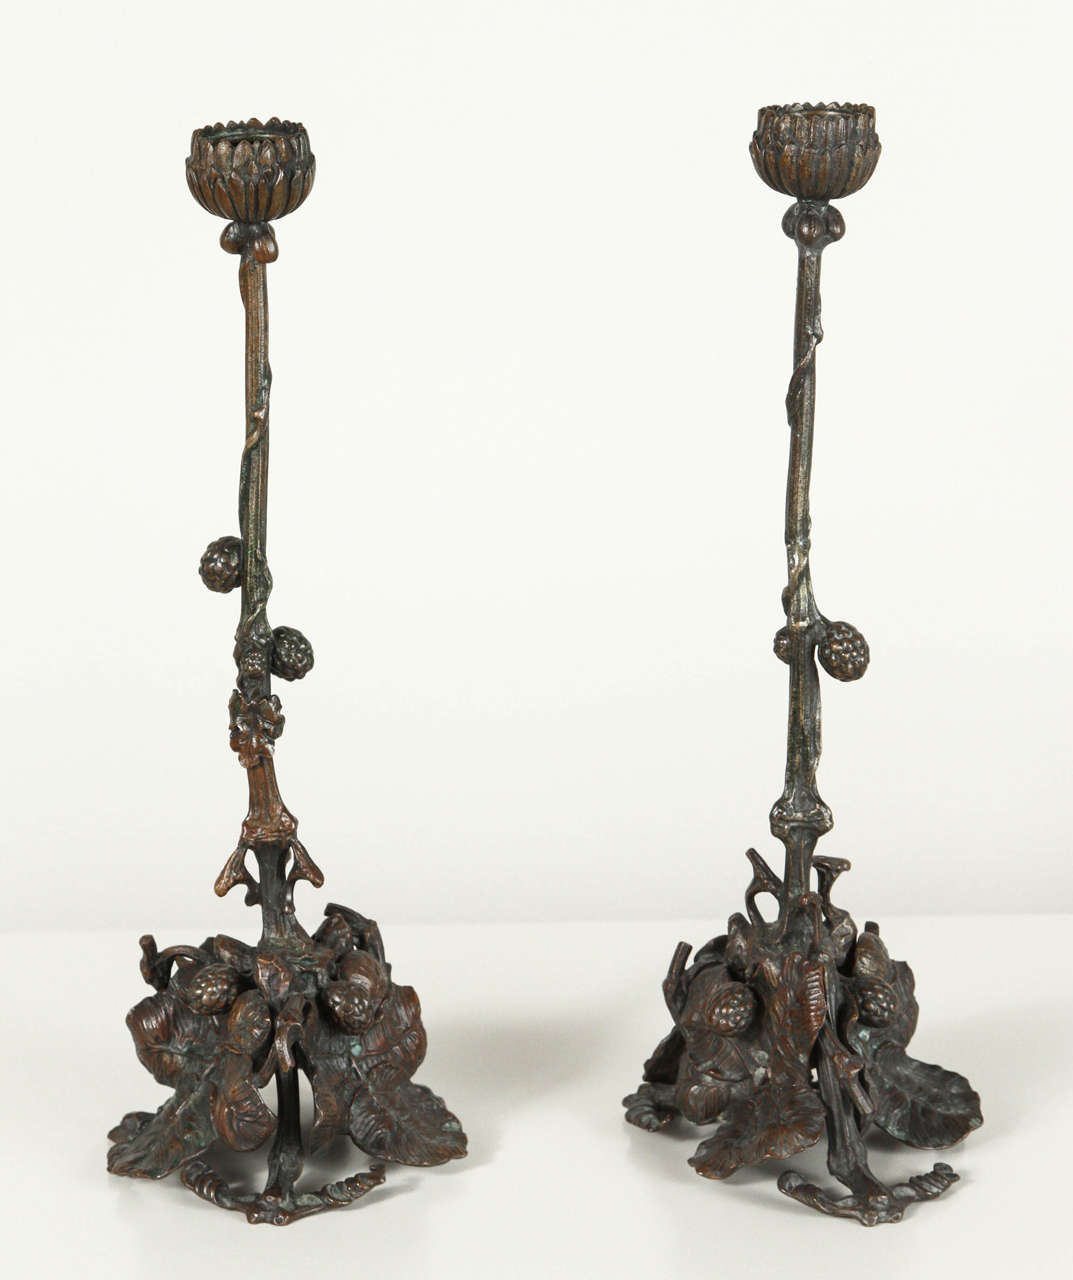 Arts and Crafts naturalist-style intricately made pair bronze candlesticks with leaves and berries.
